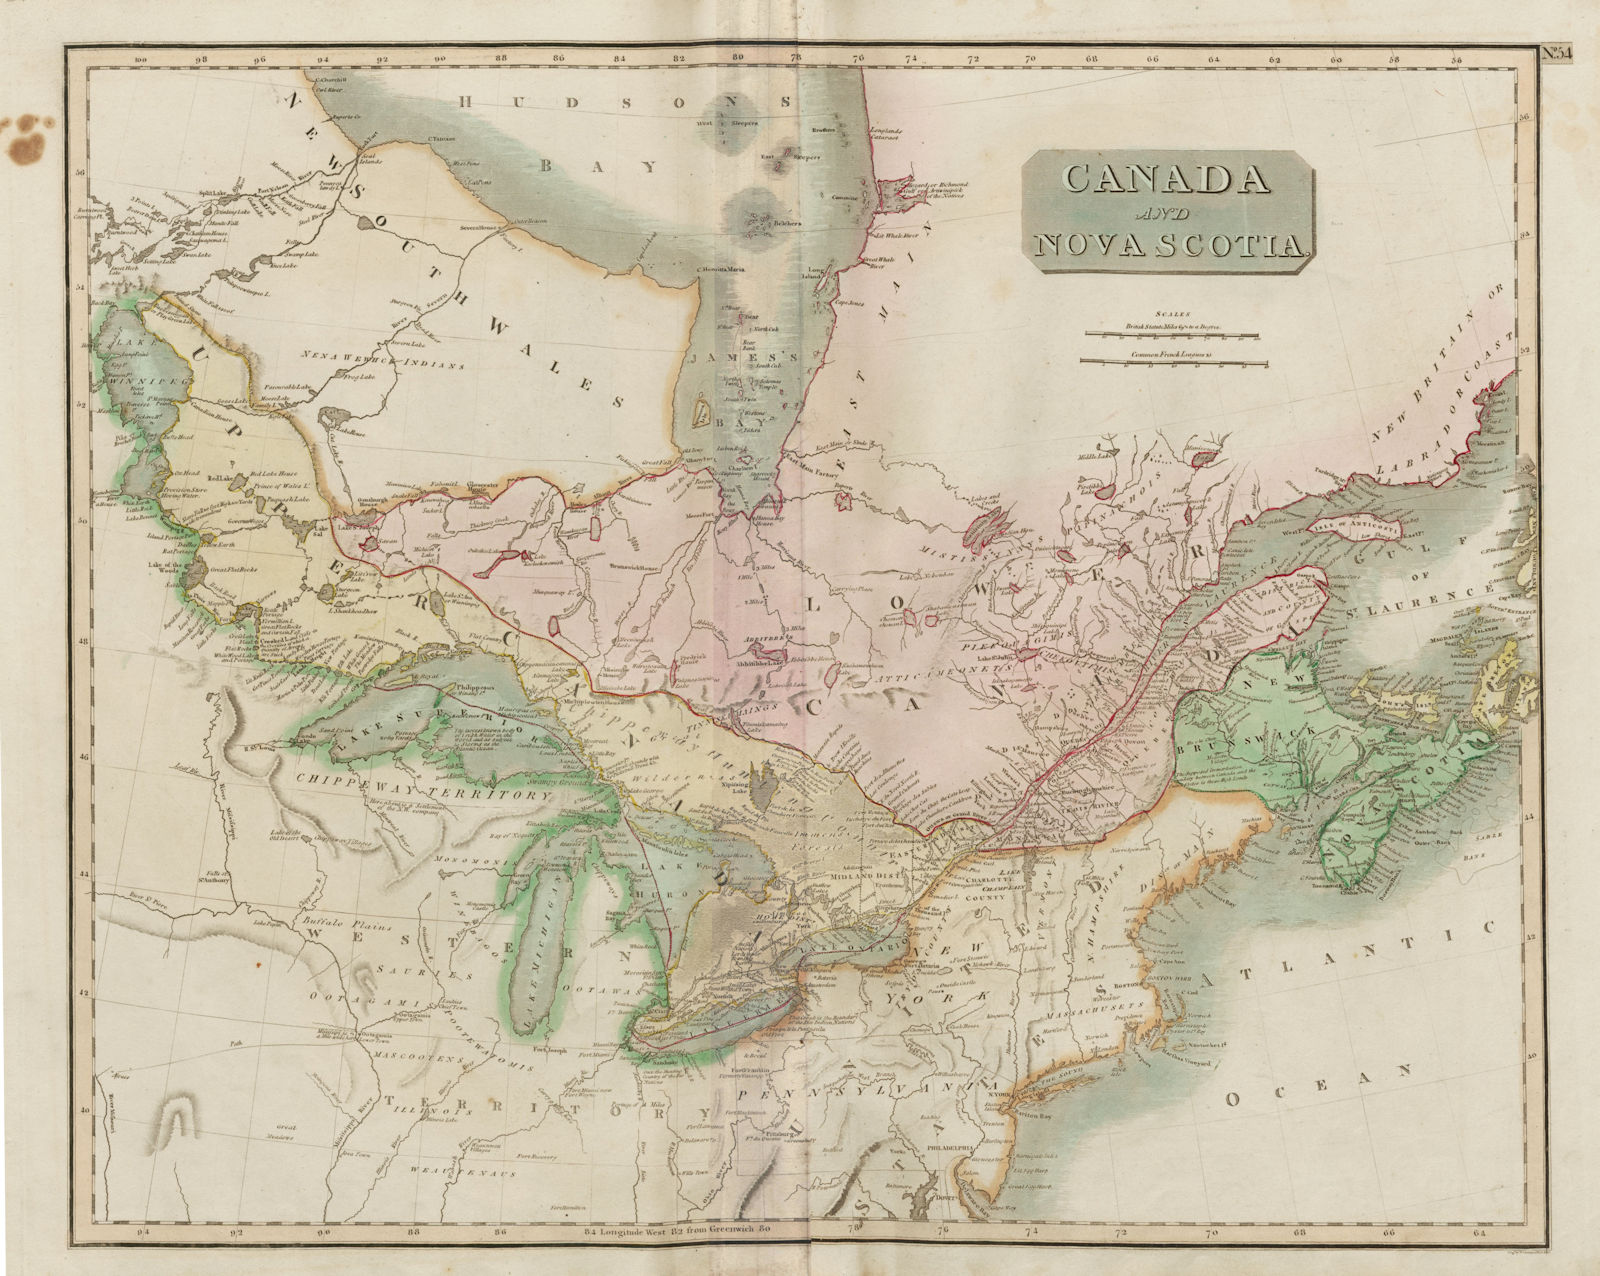 Associate Product "Canada and Nova Scotia" by John Thomson. British North America 1817 old map